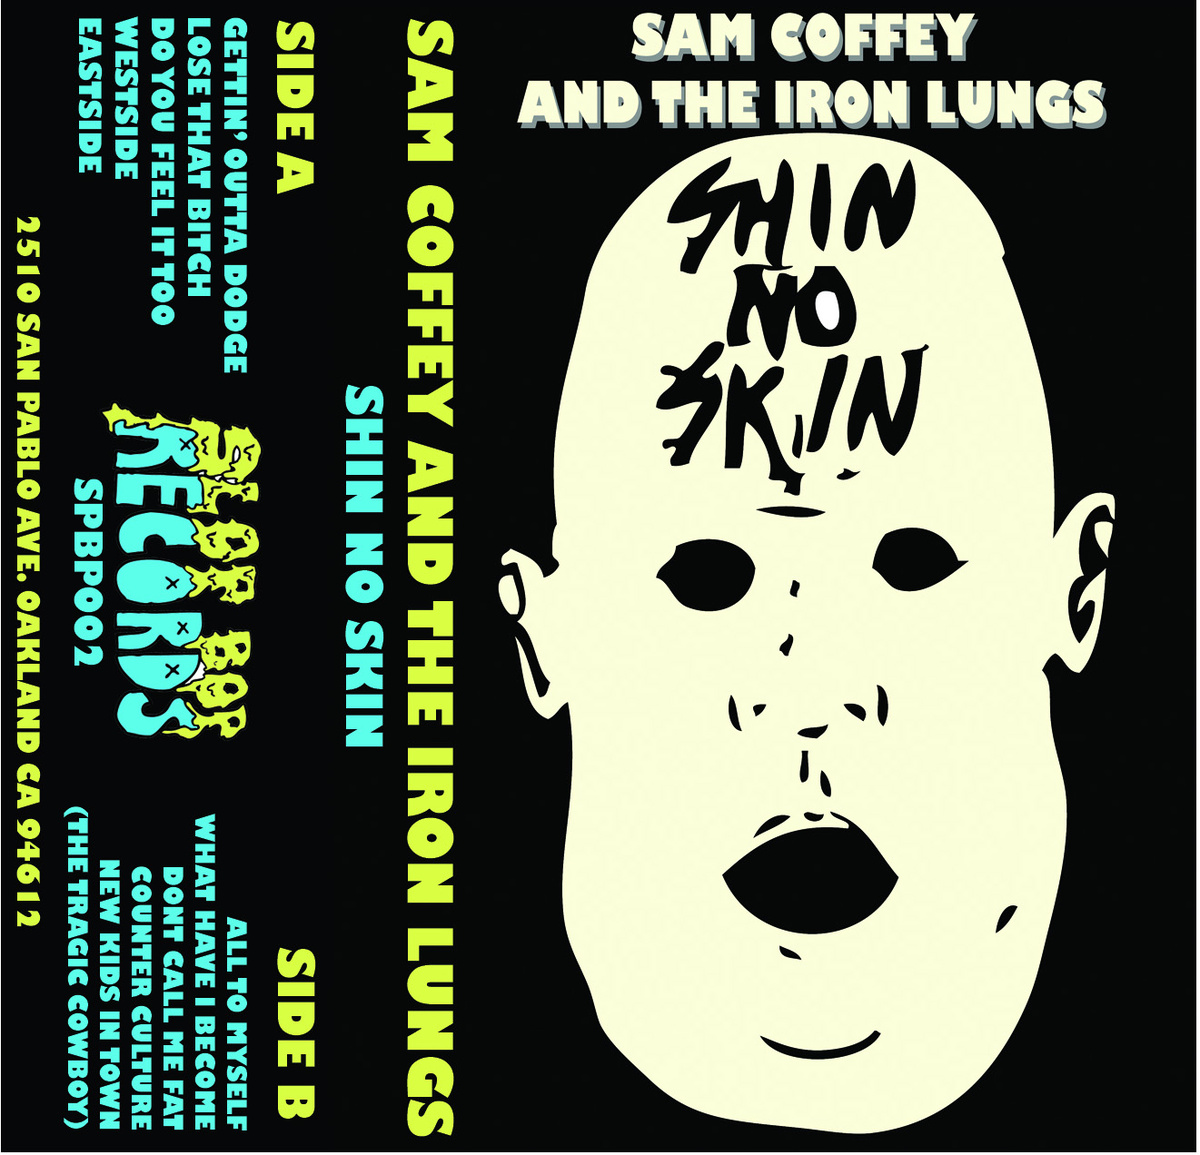 Sam Coffey And The Iron Lungs- Shin No Skin Cassette Tape